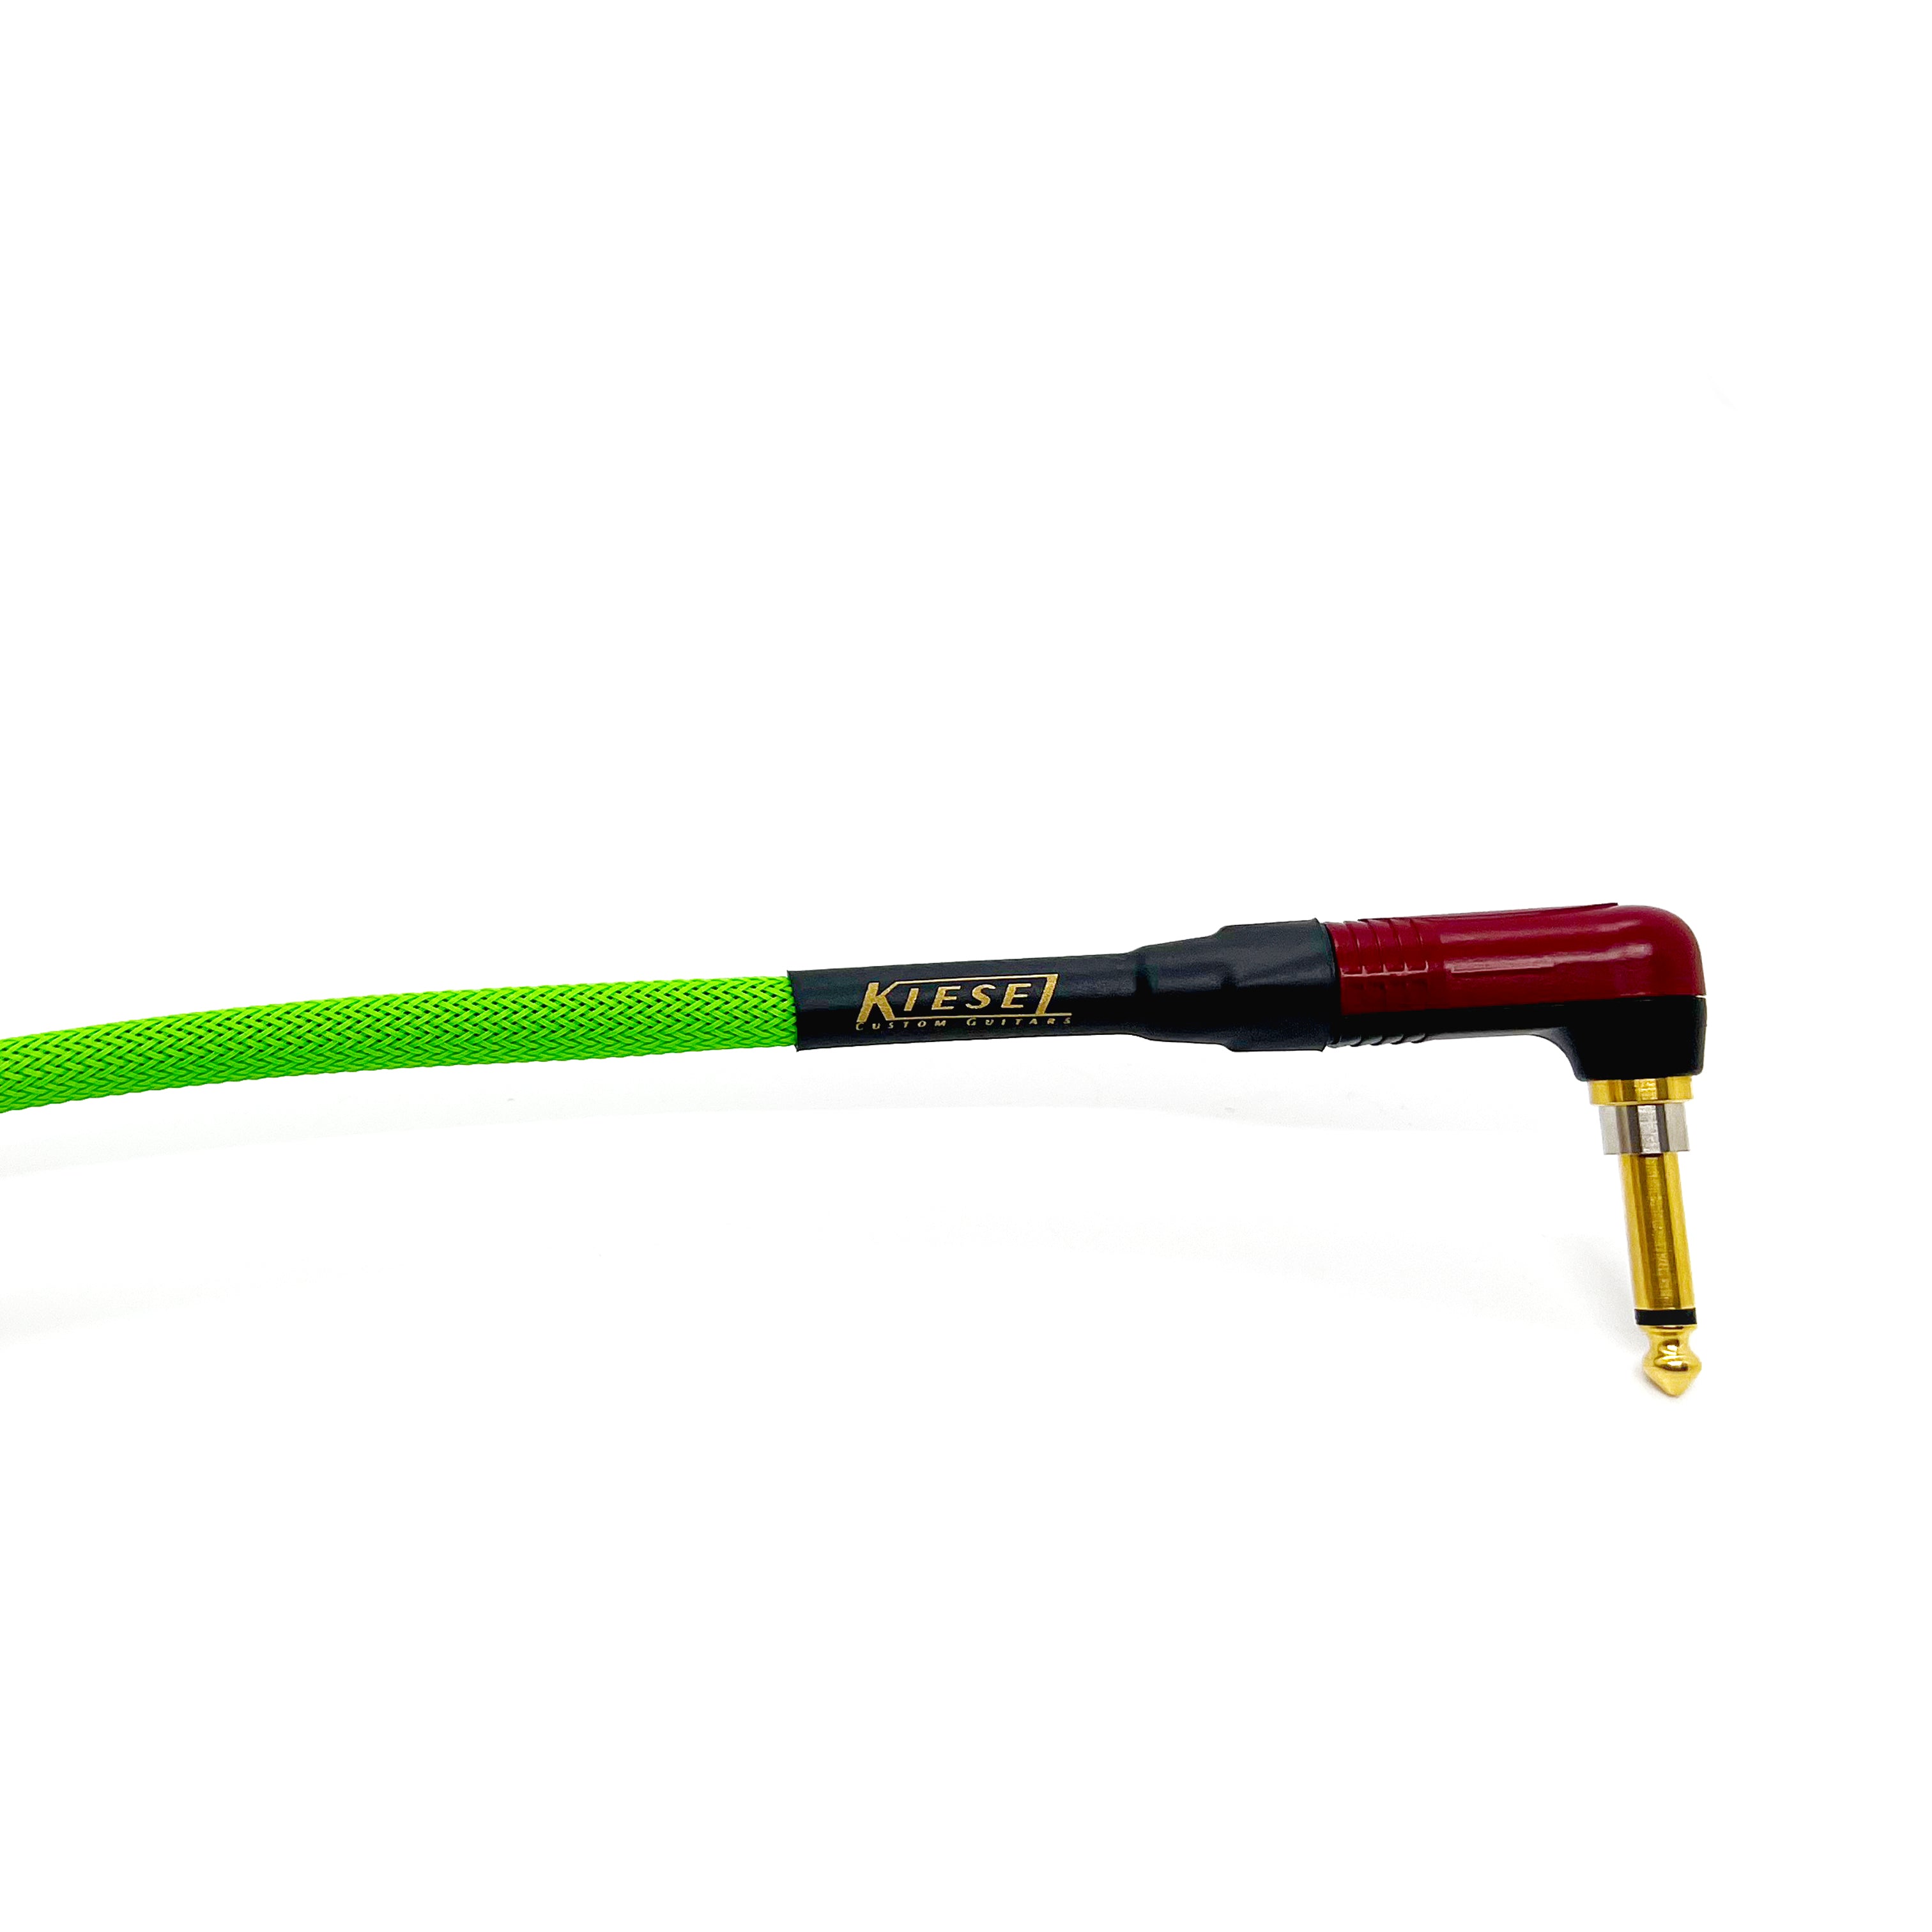 The Kiesel Silent Instrument Cable - Atomic Green